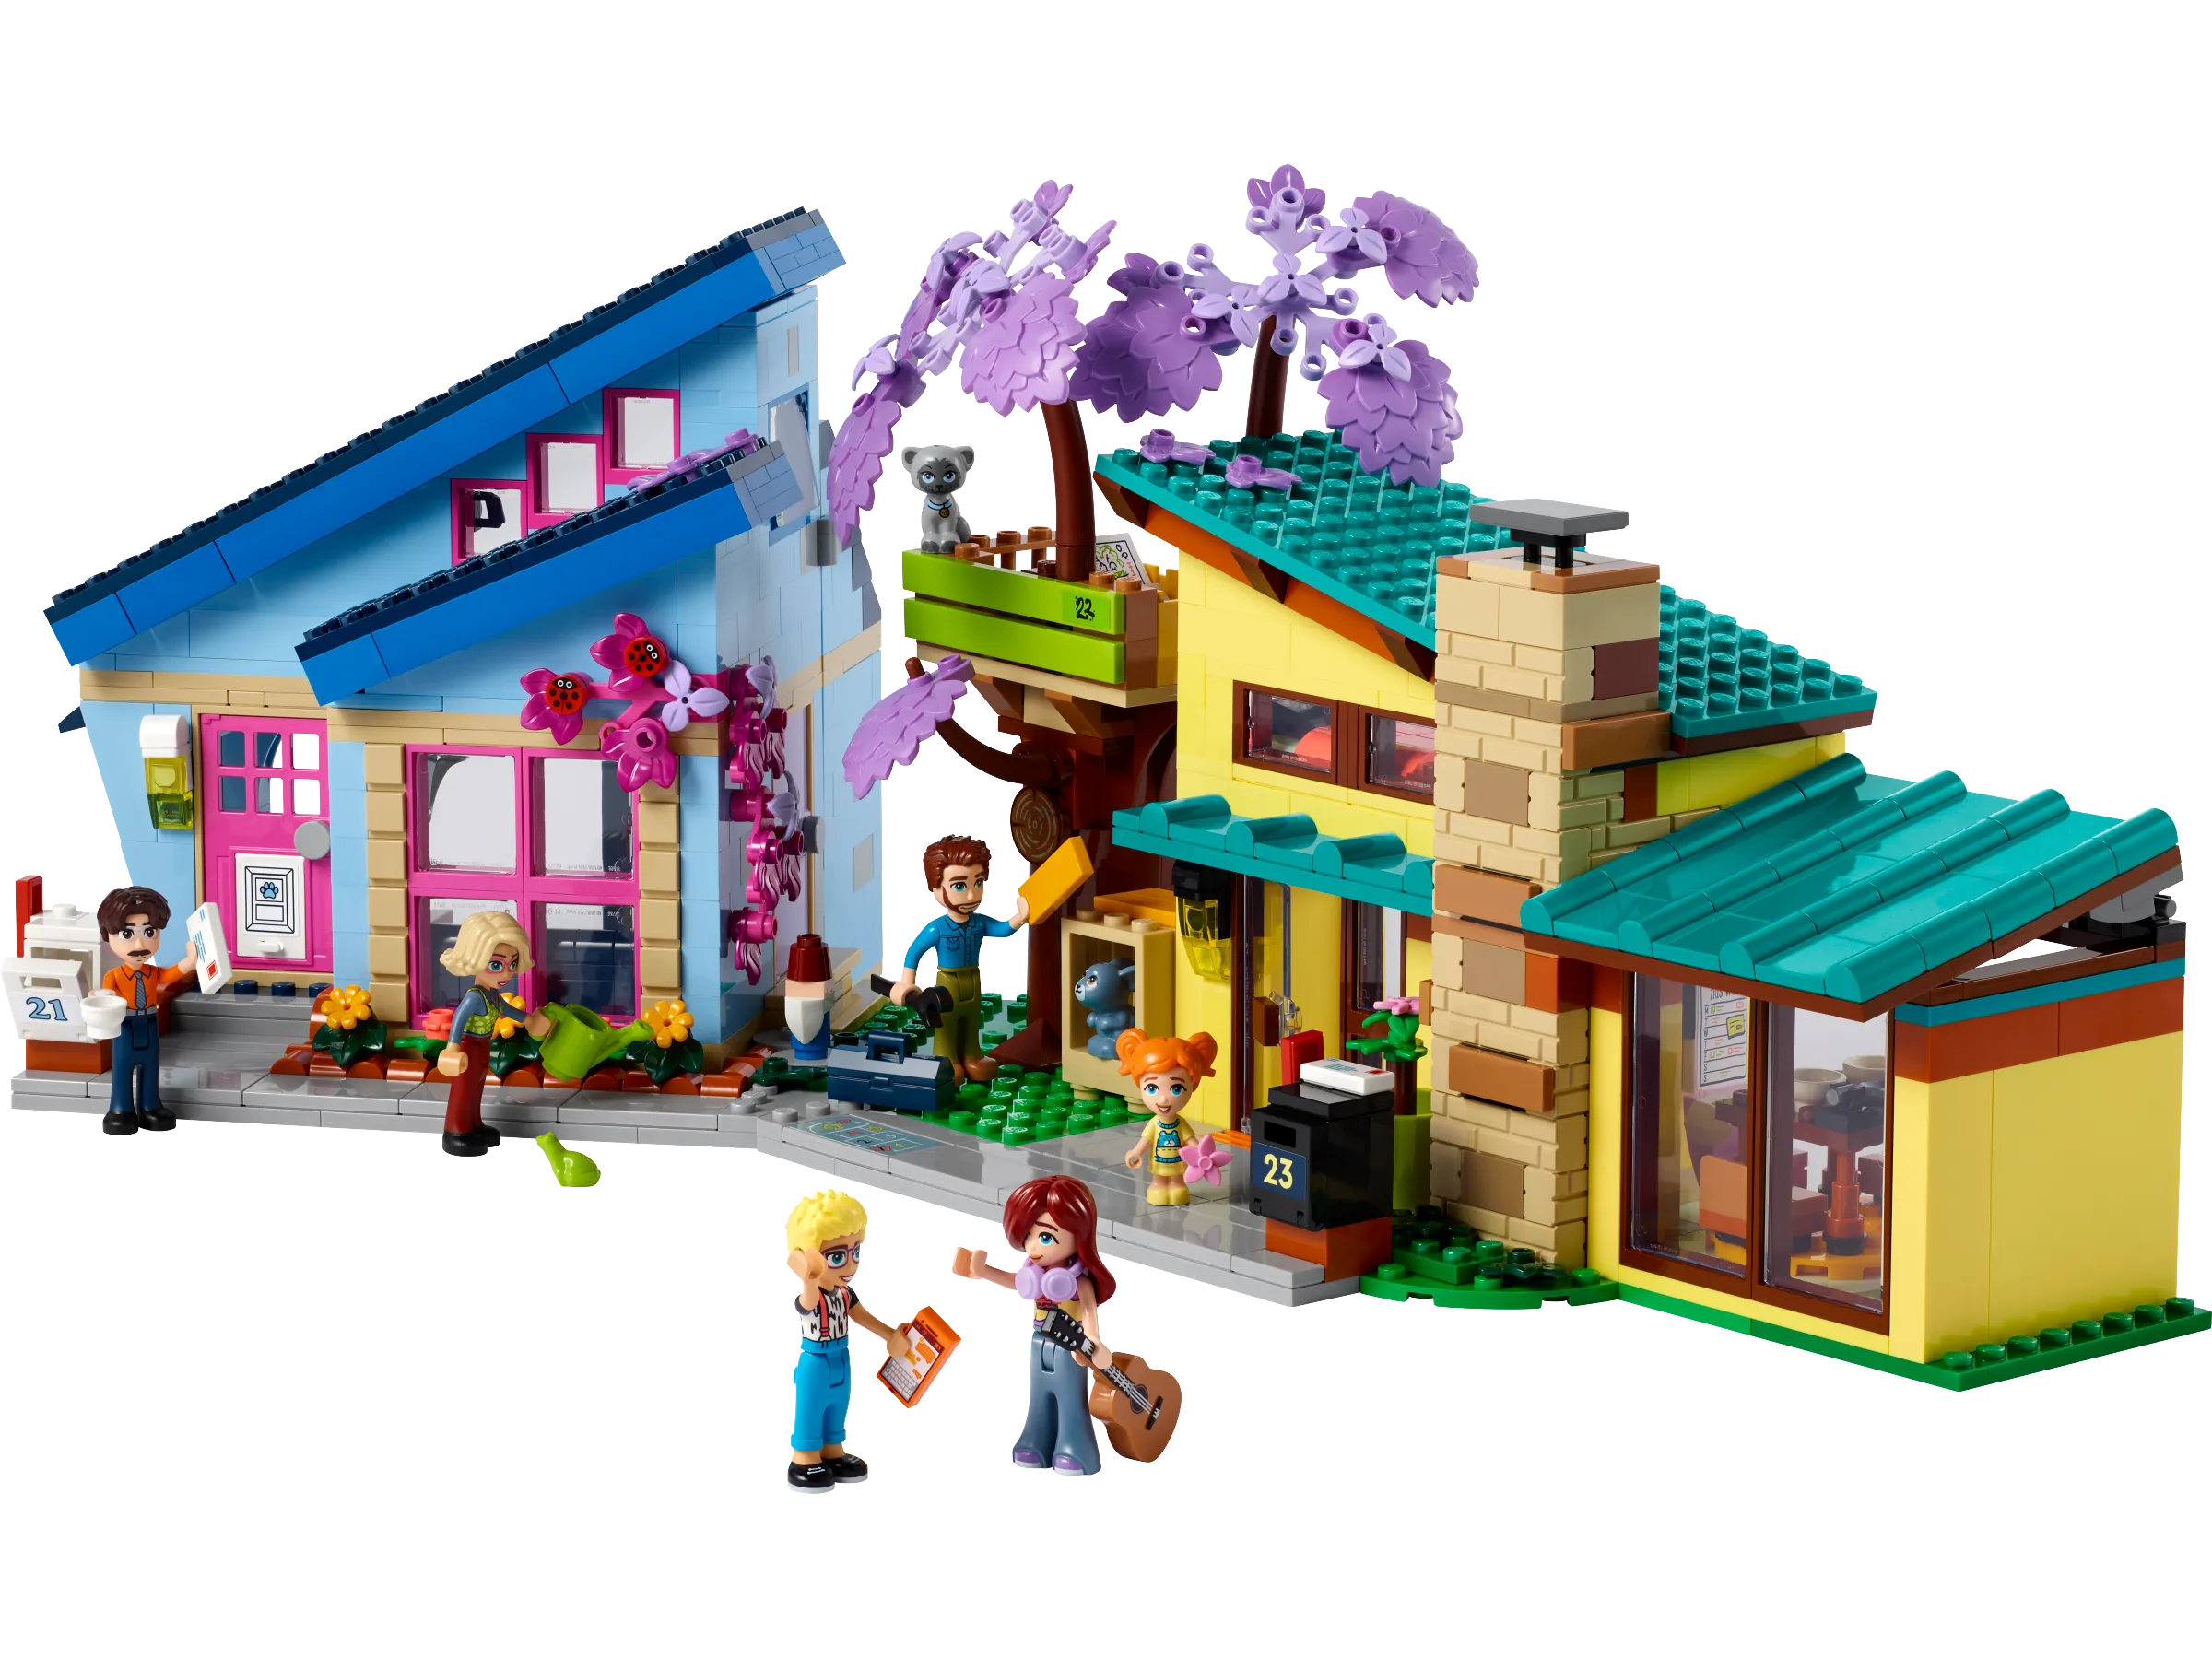 LEGO Friends Olly and Paisley's Family Houses